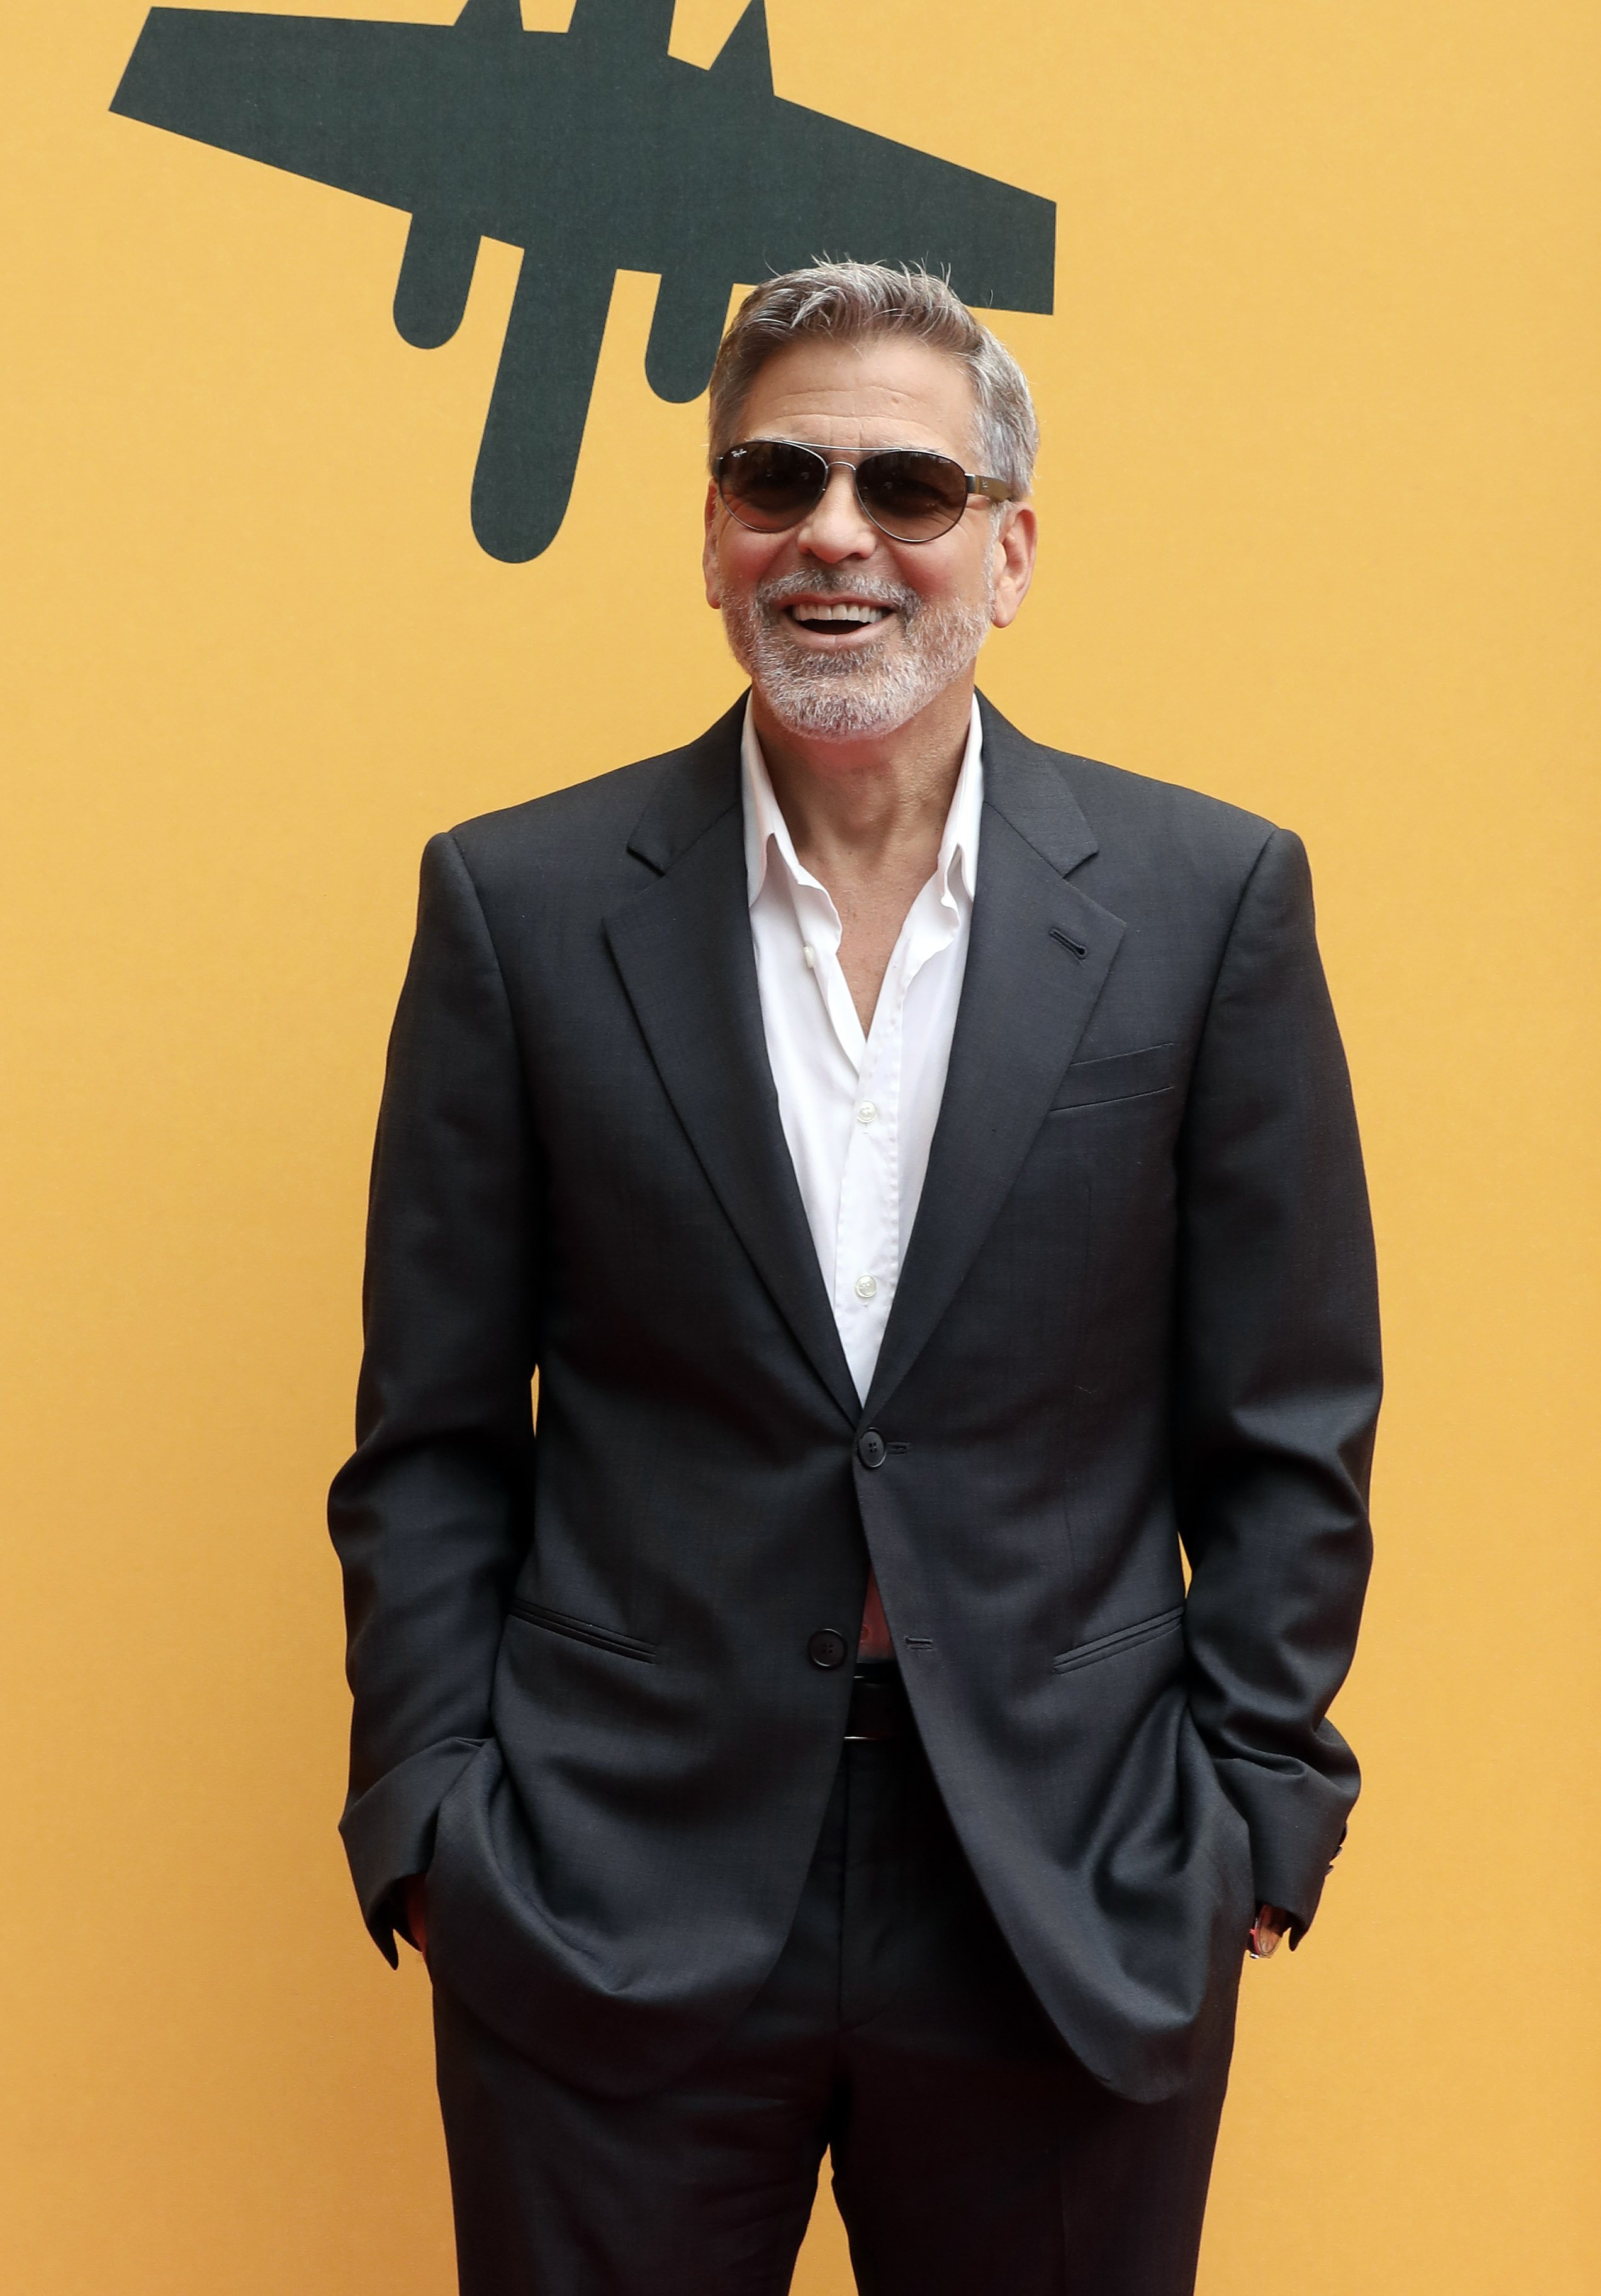 George Clooney beim "Catch-22"-Fototermin im Kino Space Moderno am 13. Mai 2019 in Rom, Italien | Quelle: Getty Images